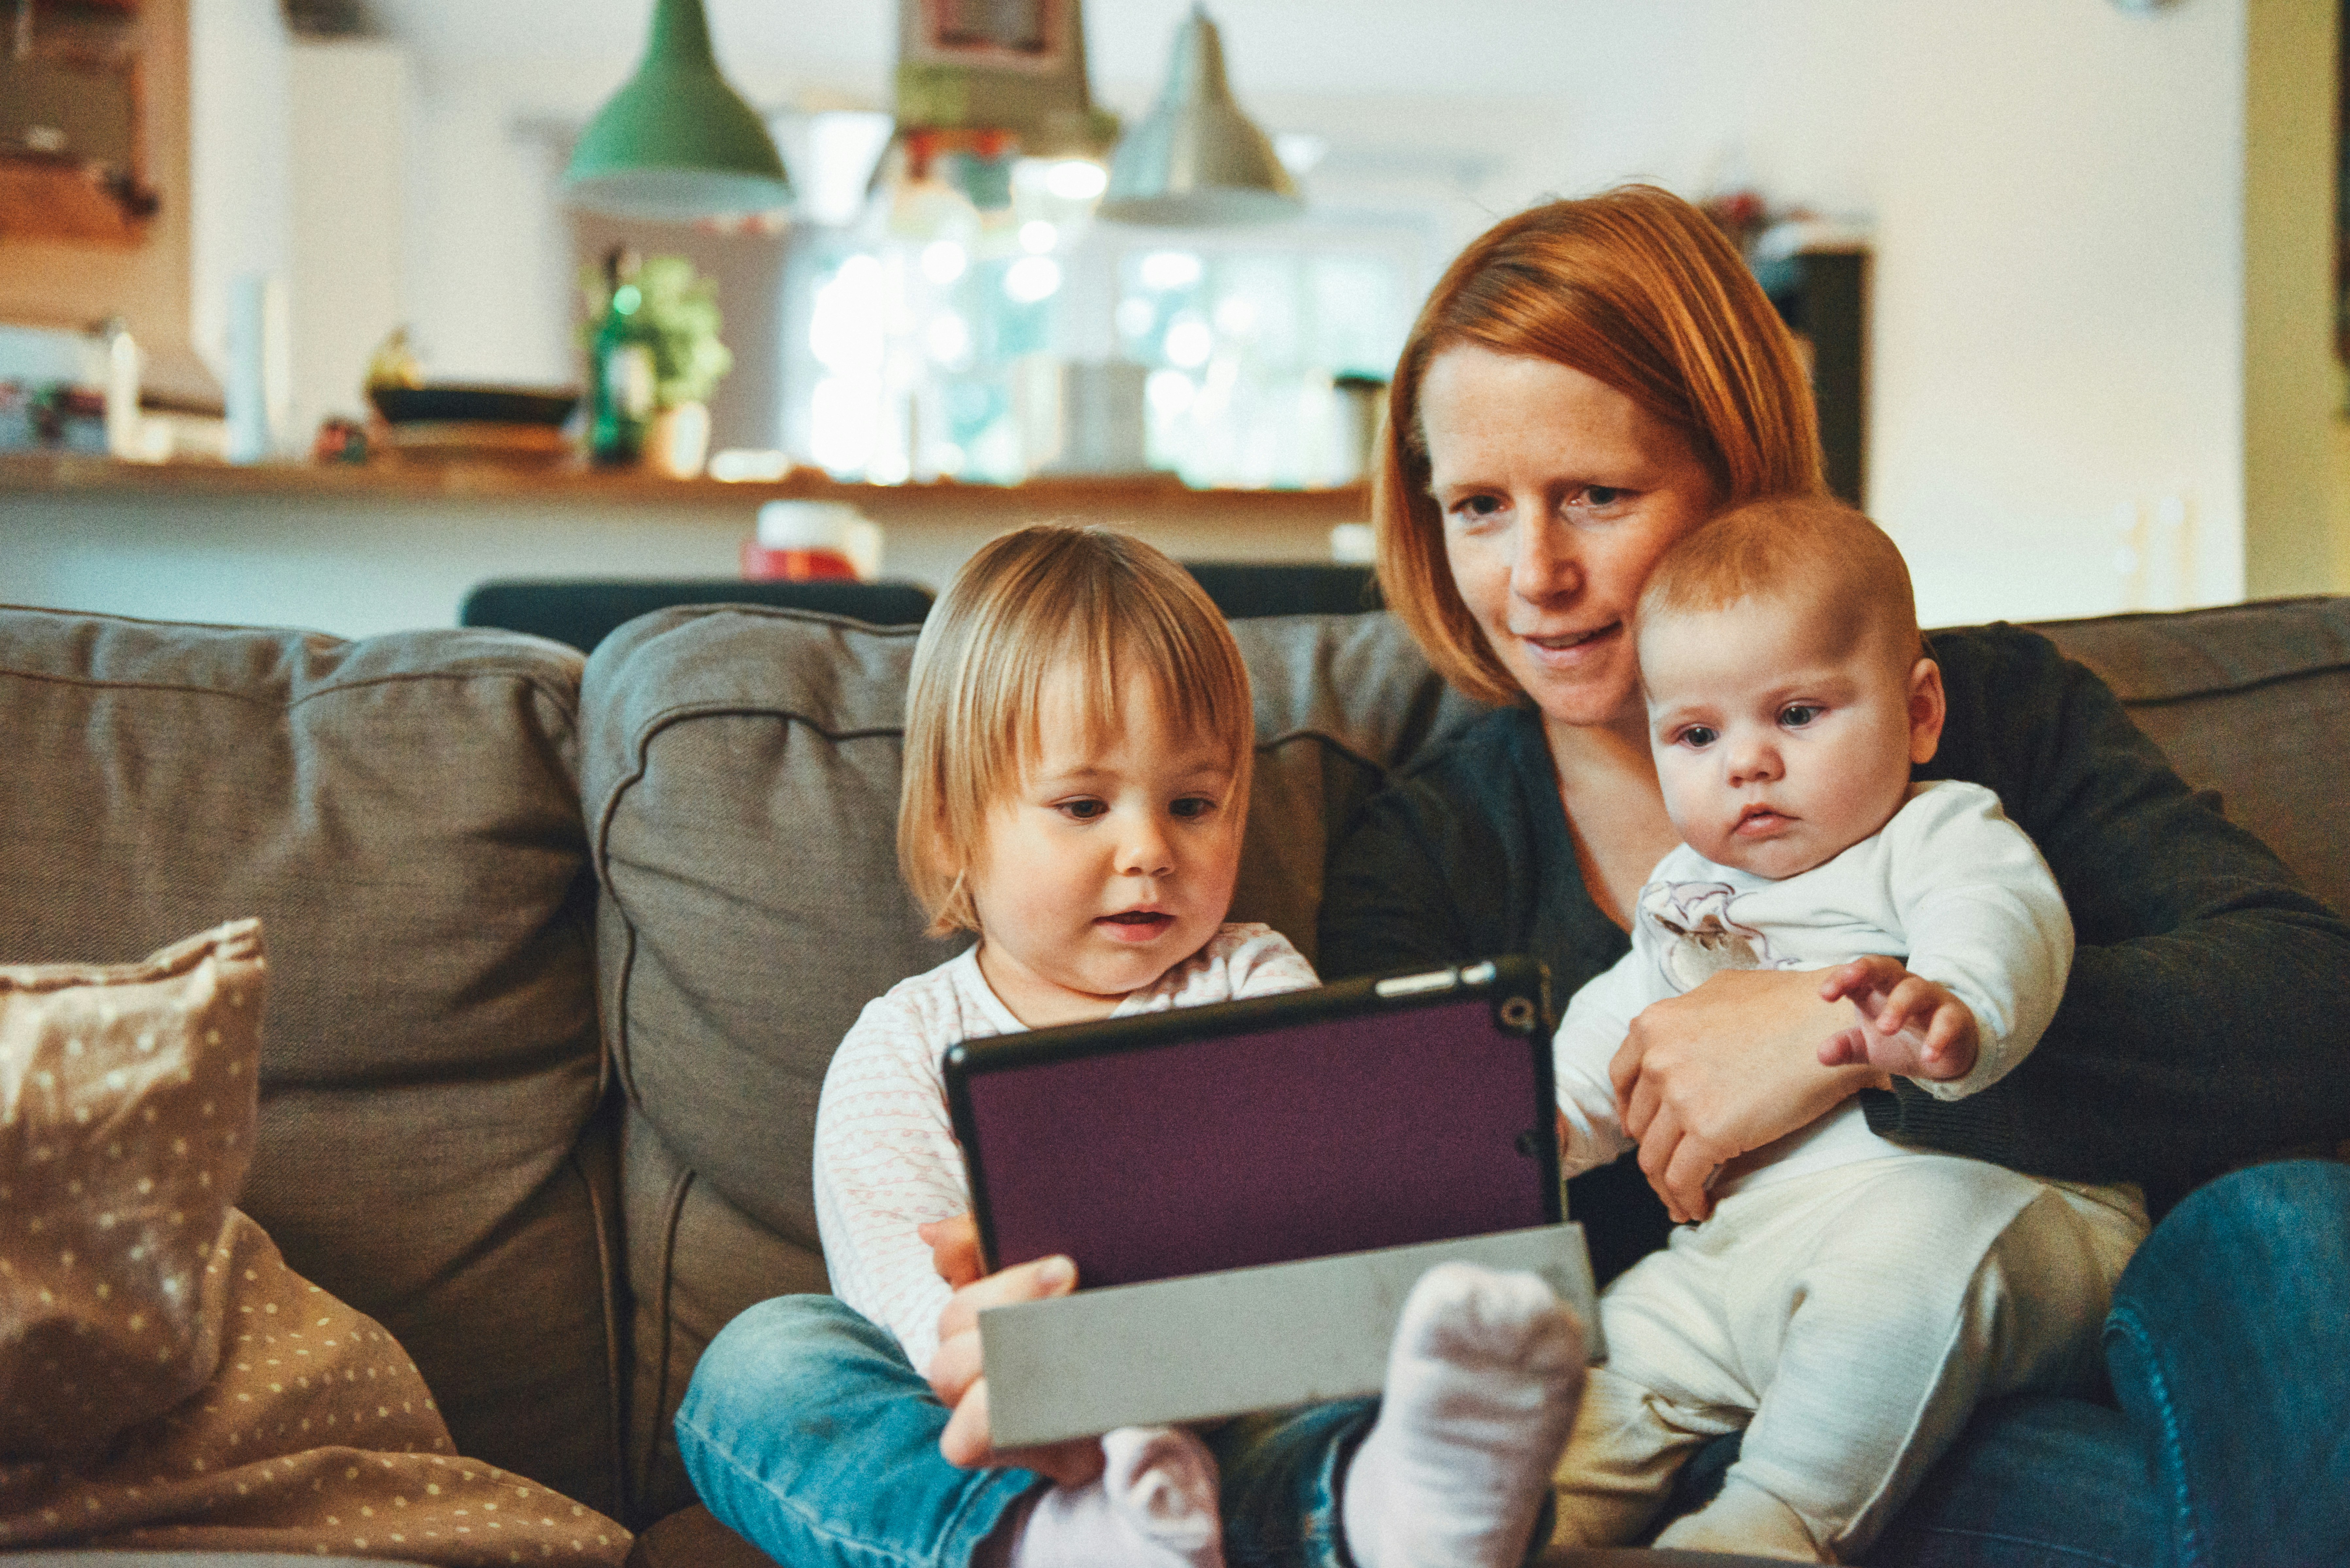 woman and two young children looking at tablet